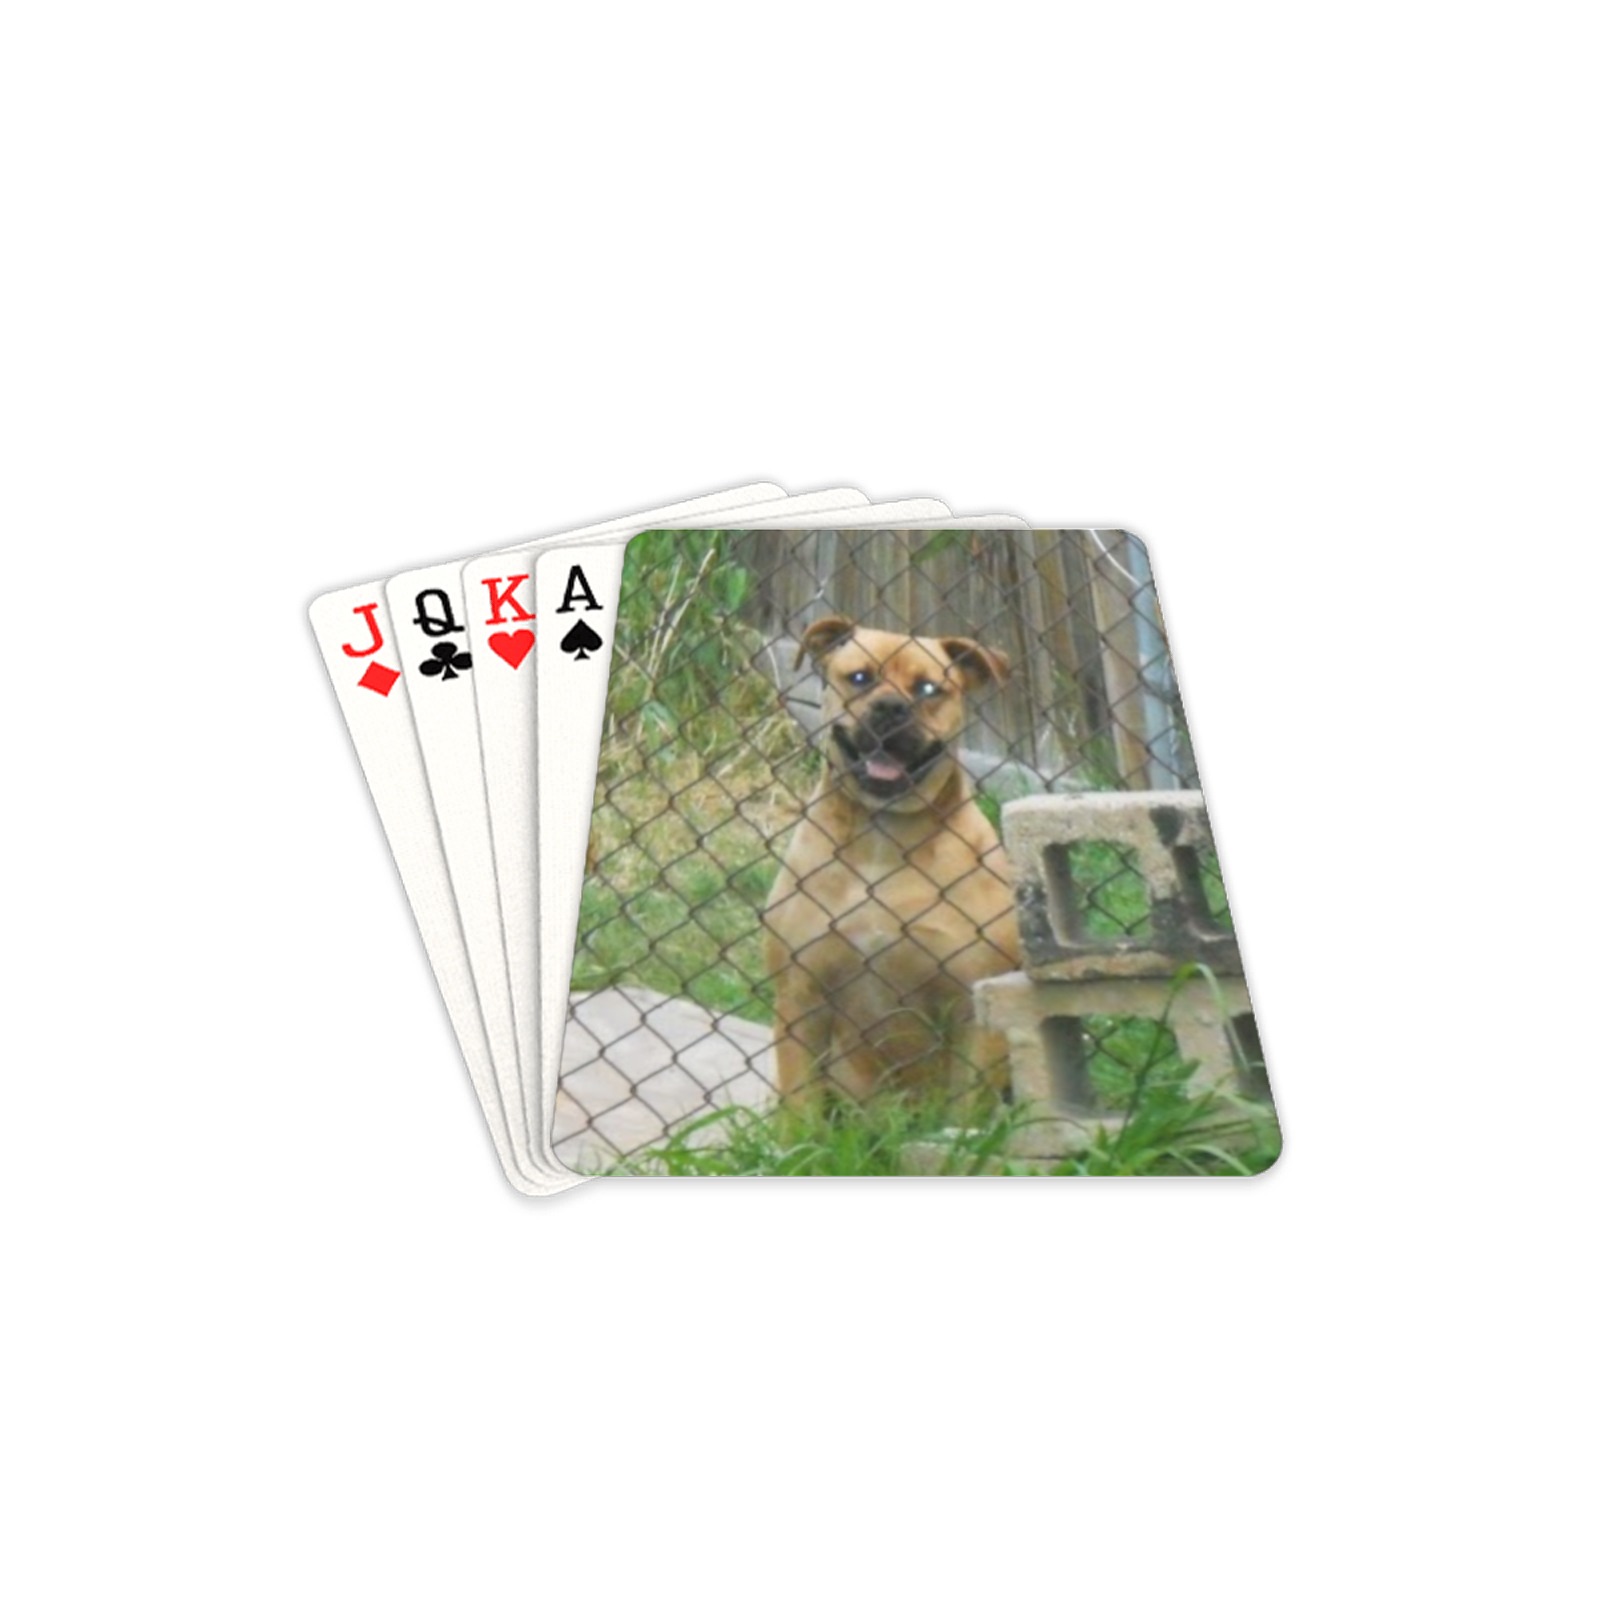 A Smiling Dog Playing Cards 2.5"x3.5"